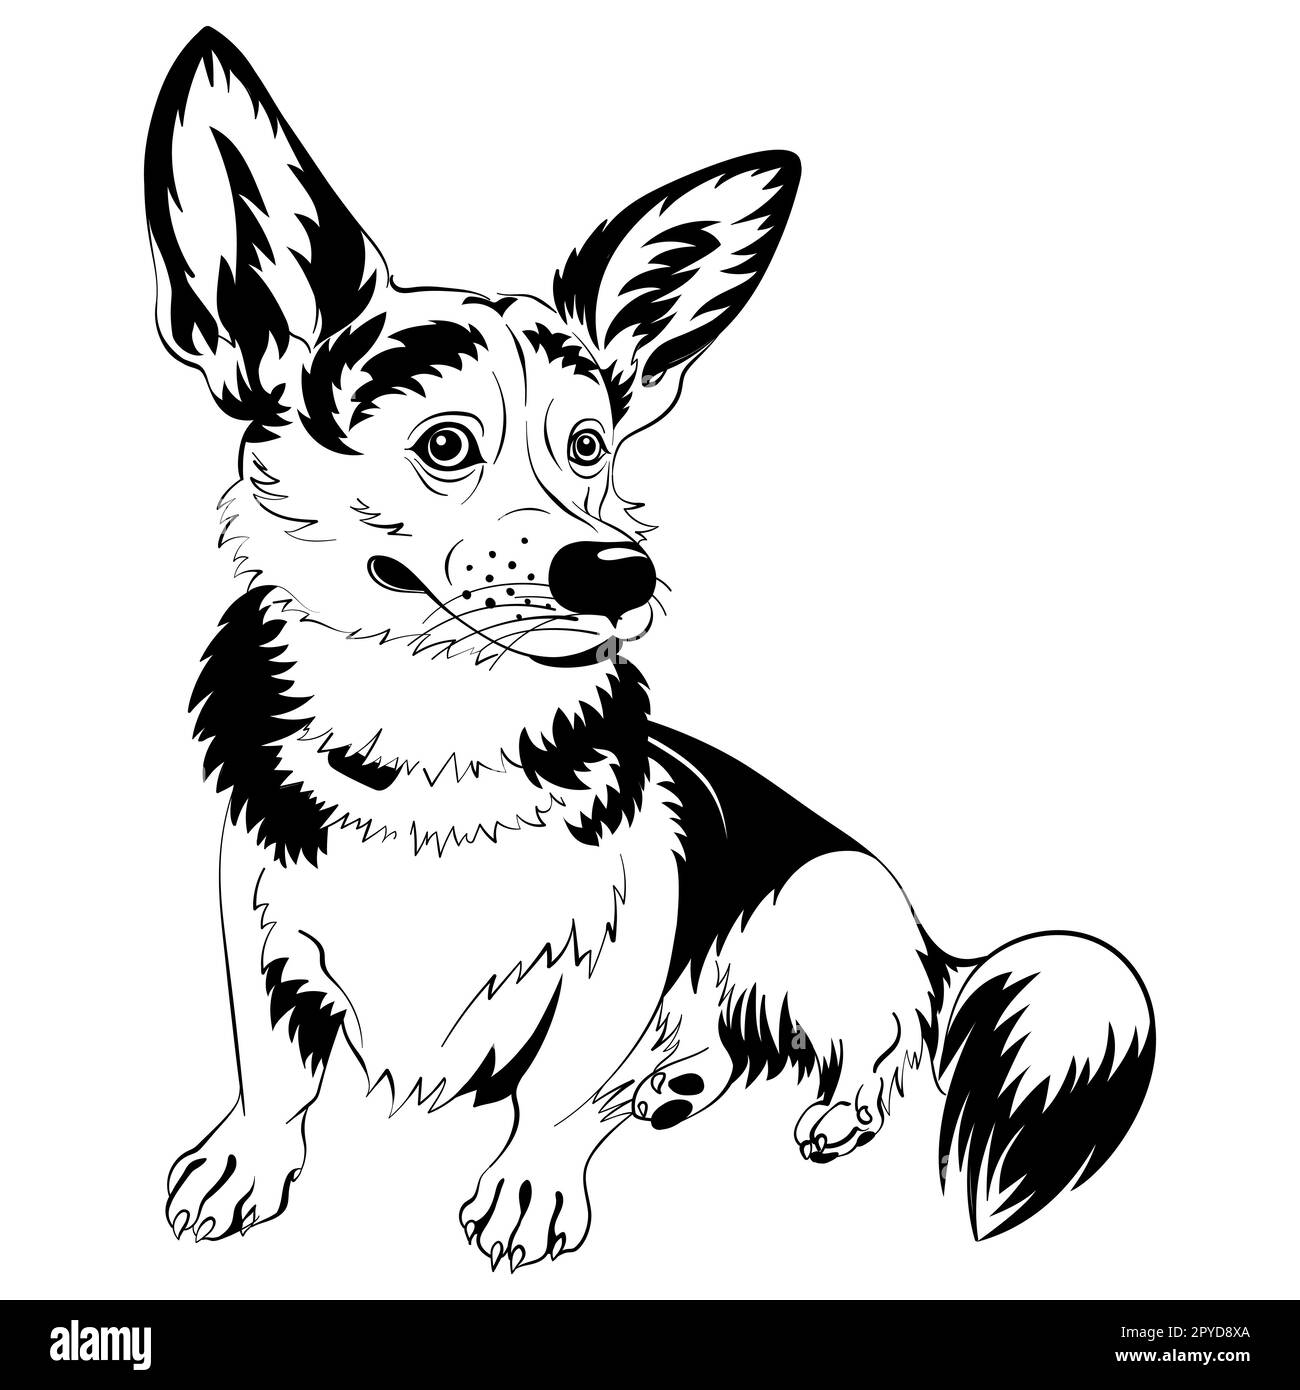 Black and white sketch of dog Welsh Corgi breed sitting and smiling Stock Photo